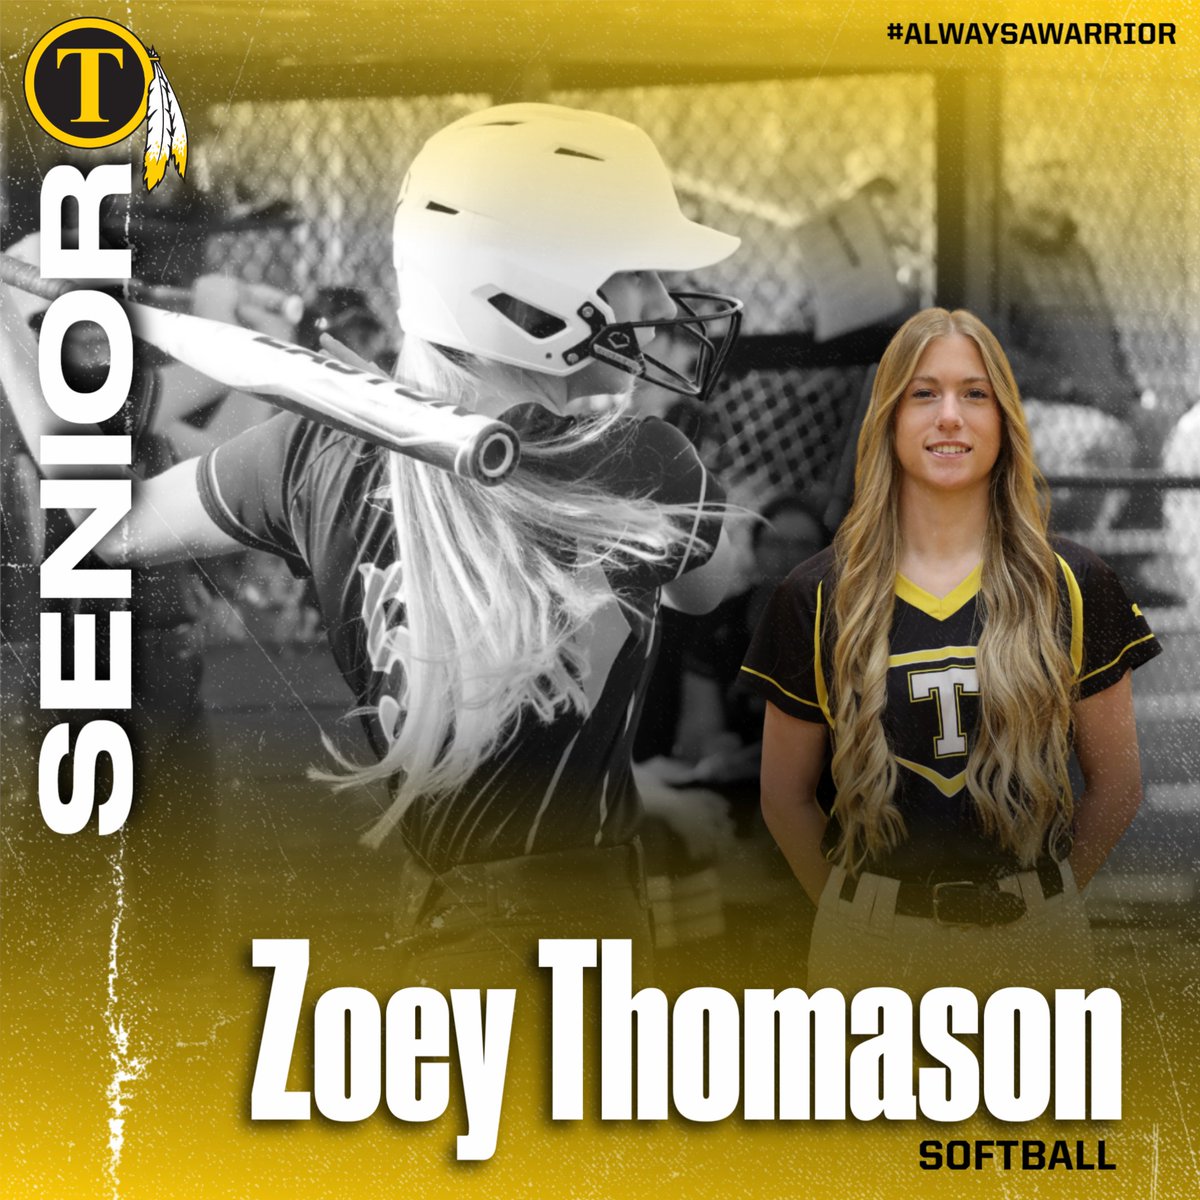 We would like to congratulate Zoey Thomason, Senior Softball player, on an outstanding career at TCHS and wish her the best of luck!  #SeniorSpotlight #alwaysawarrior